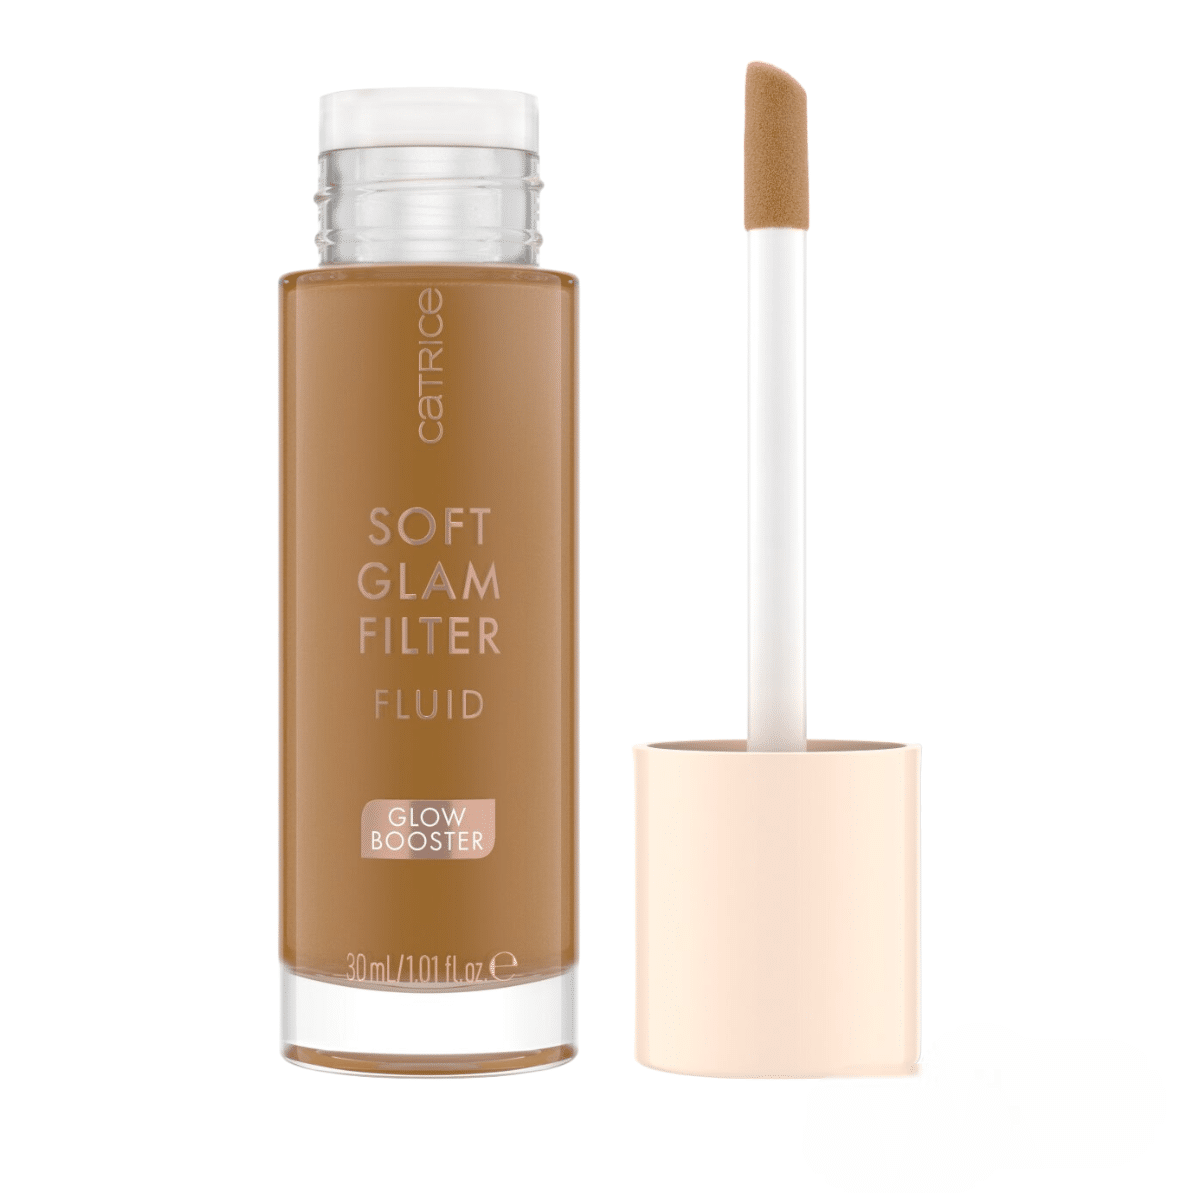 Catrice - Soft Glam Filter Fluid 080 30ml